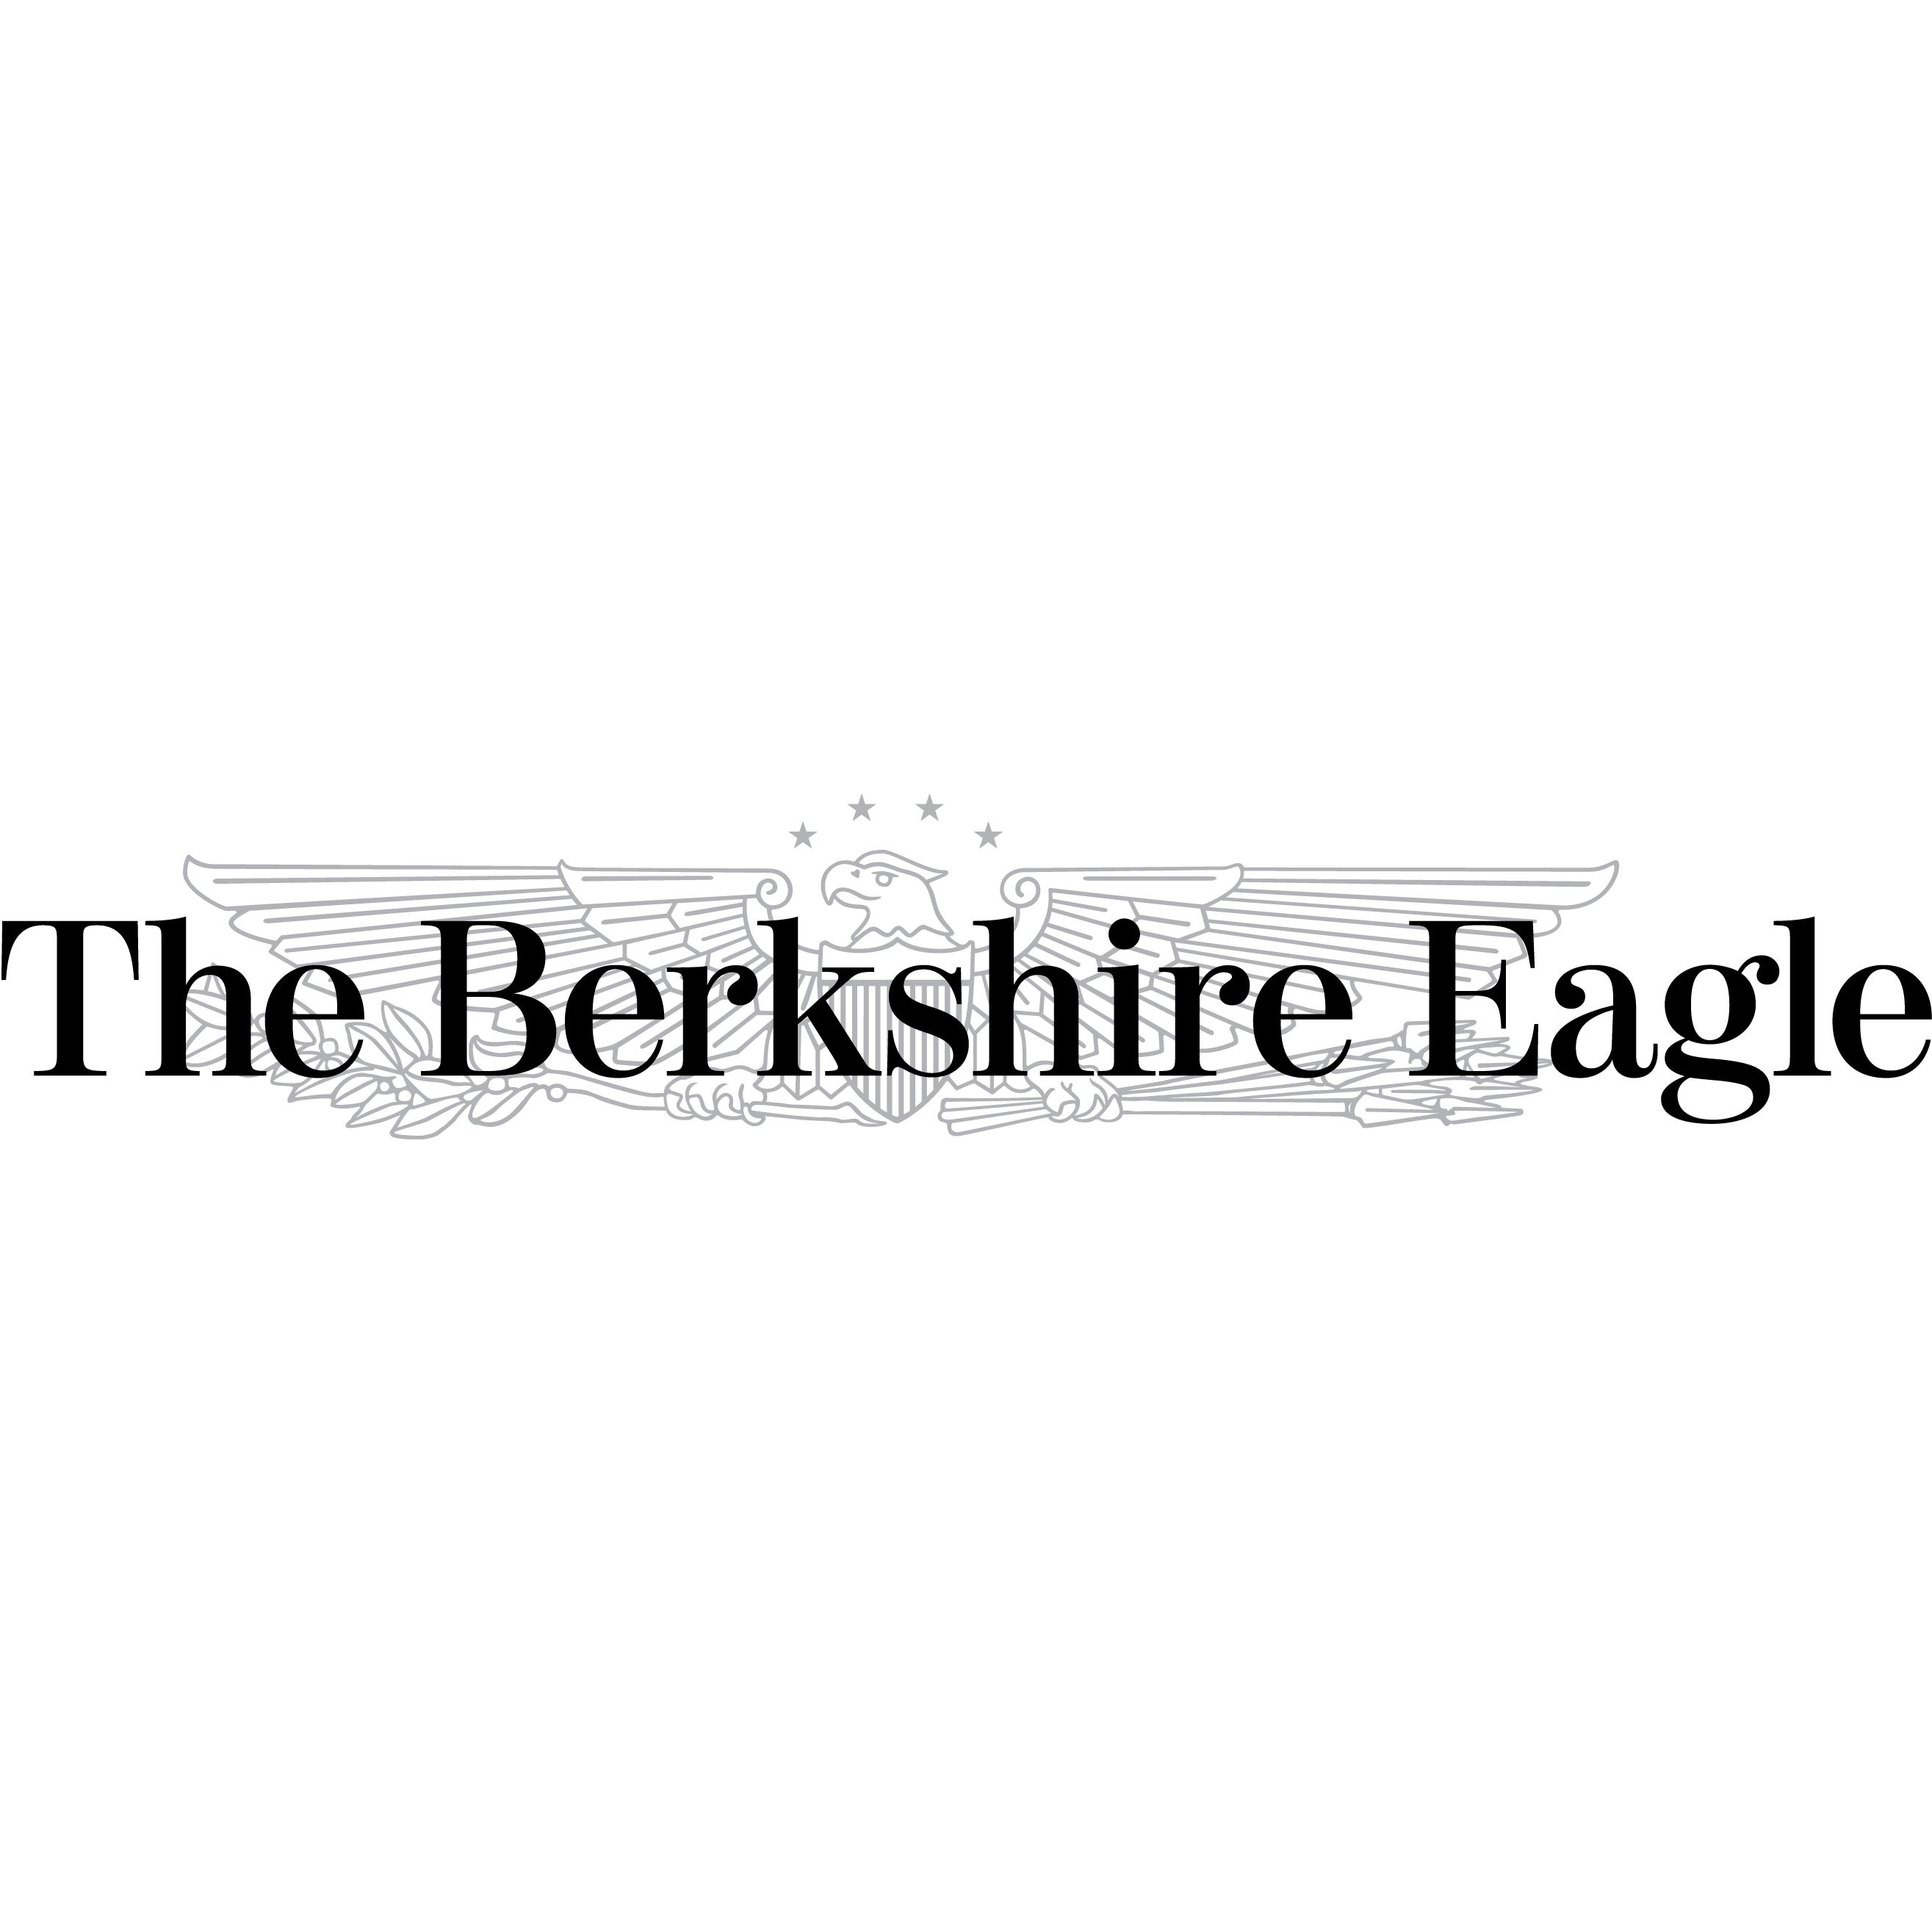 The Berkshire Eagle Downtown Pittsfield Western Massachusetts The